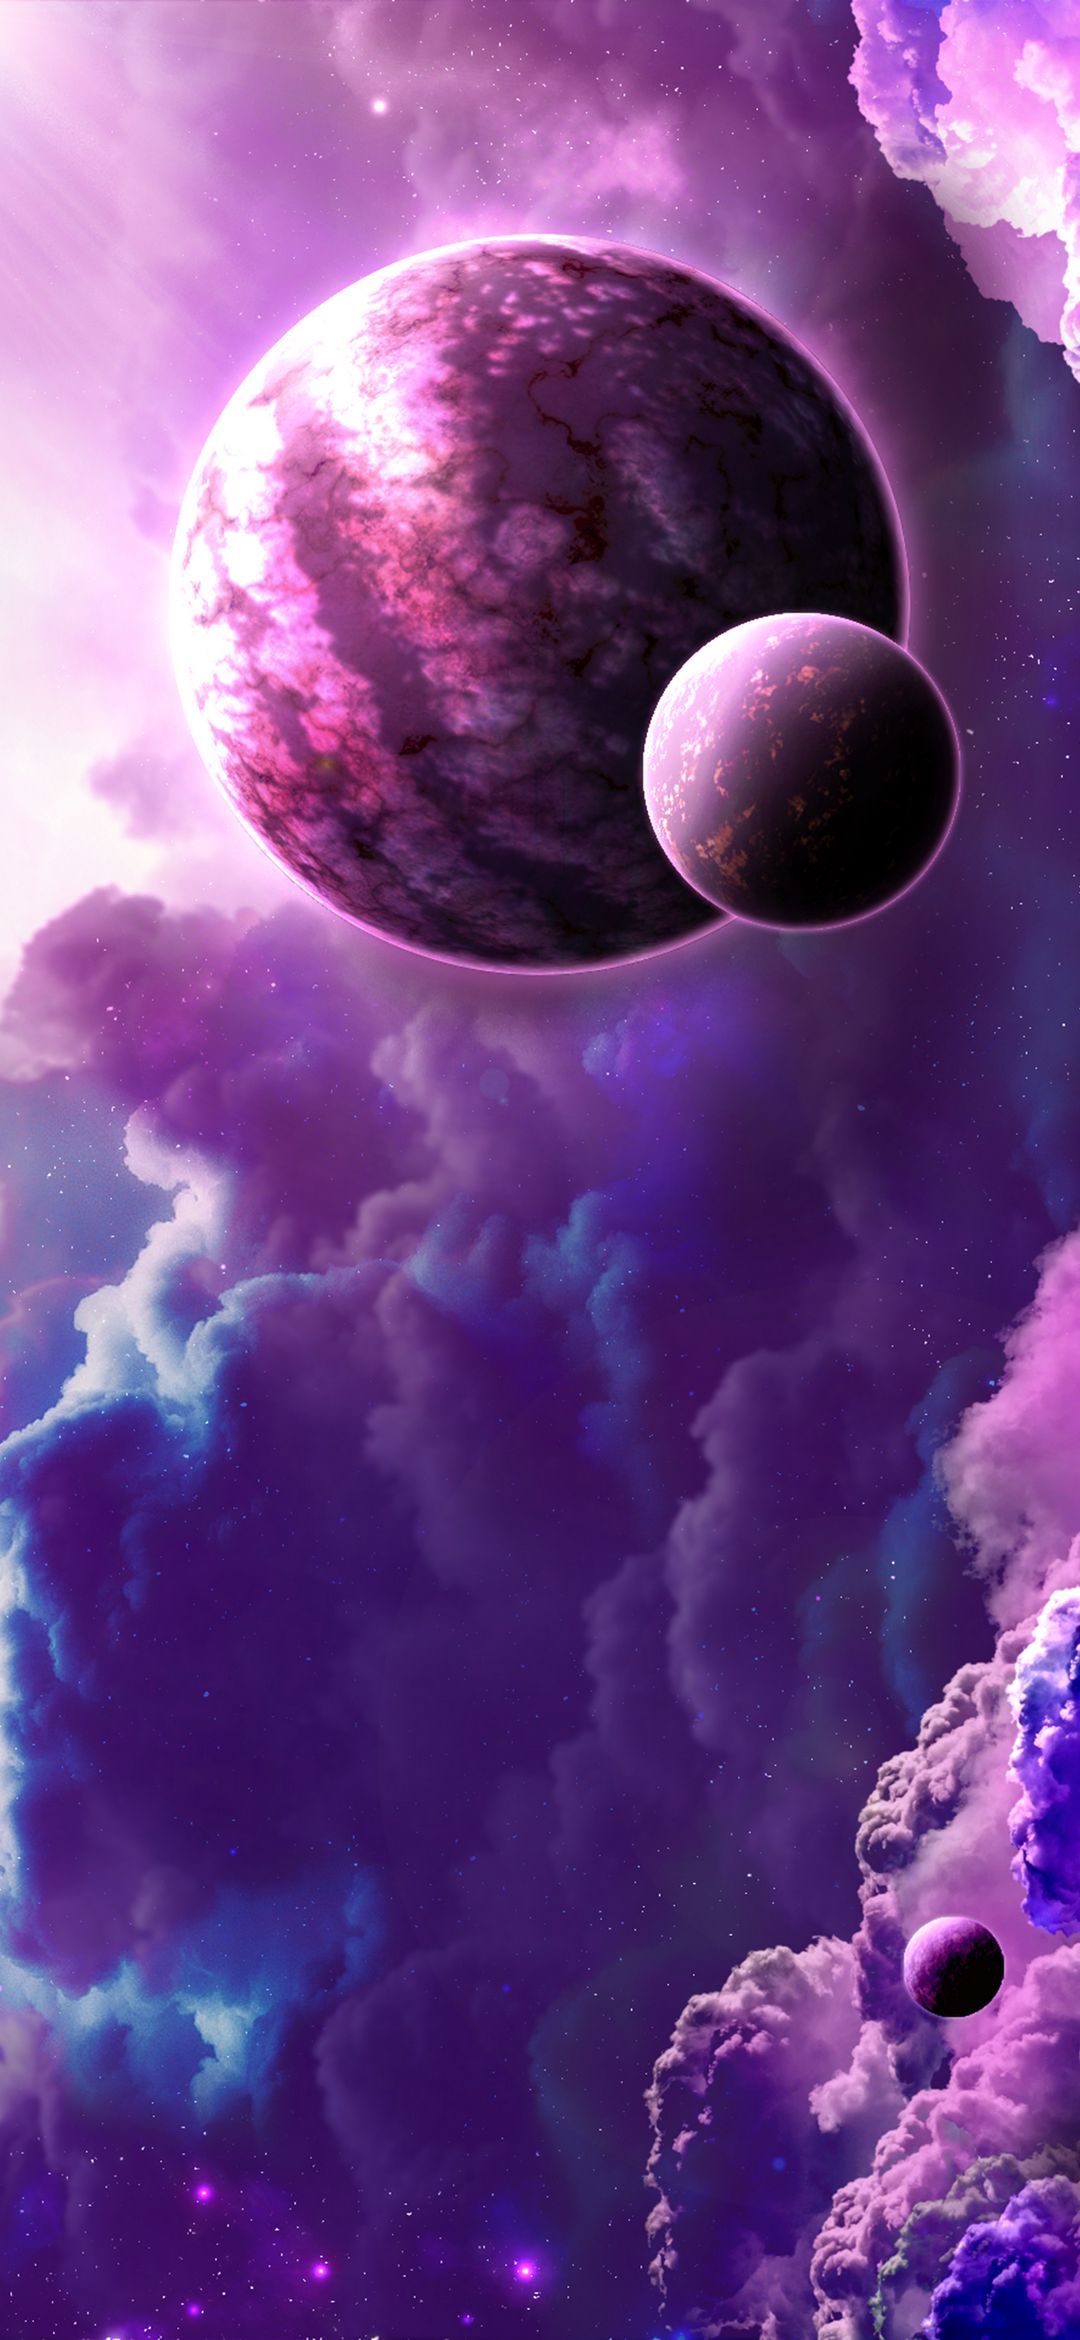 Download Wallpaper Clouds Plnets Aesthetic, Planet, Universe, Star, Space, Background Free Image. - Planet, purple